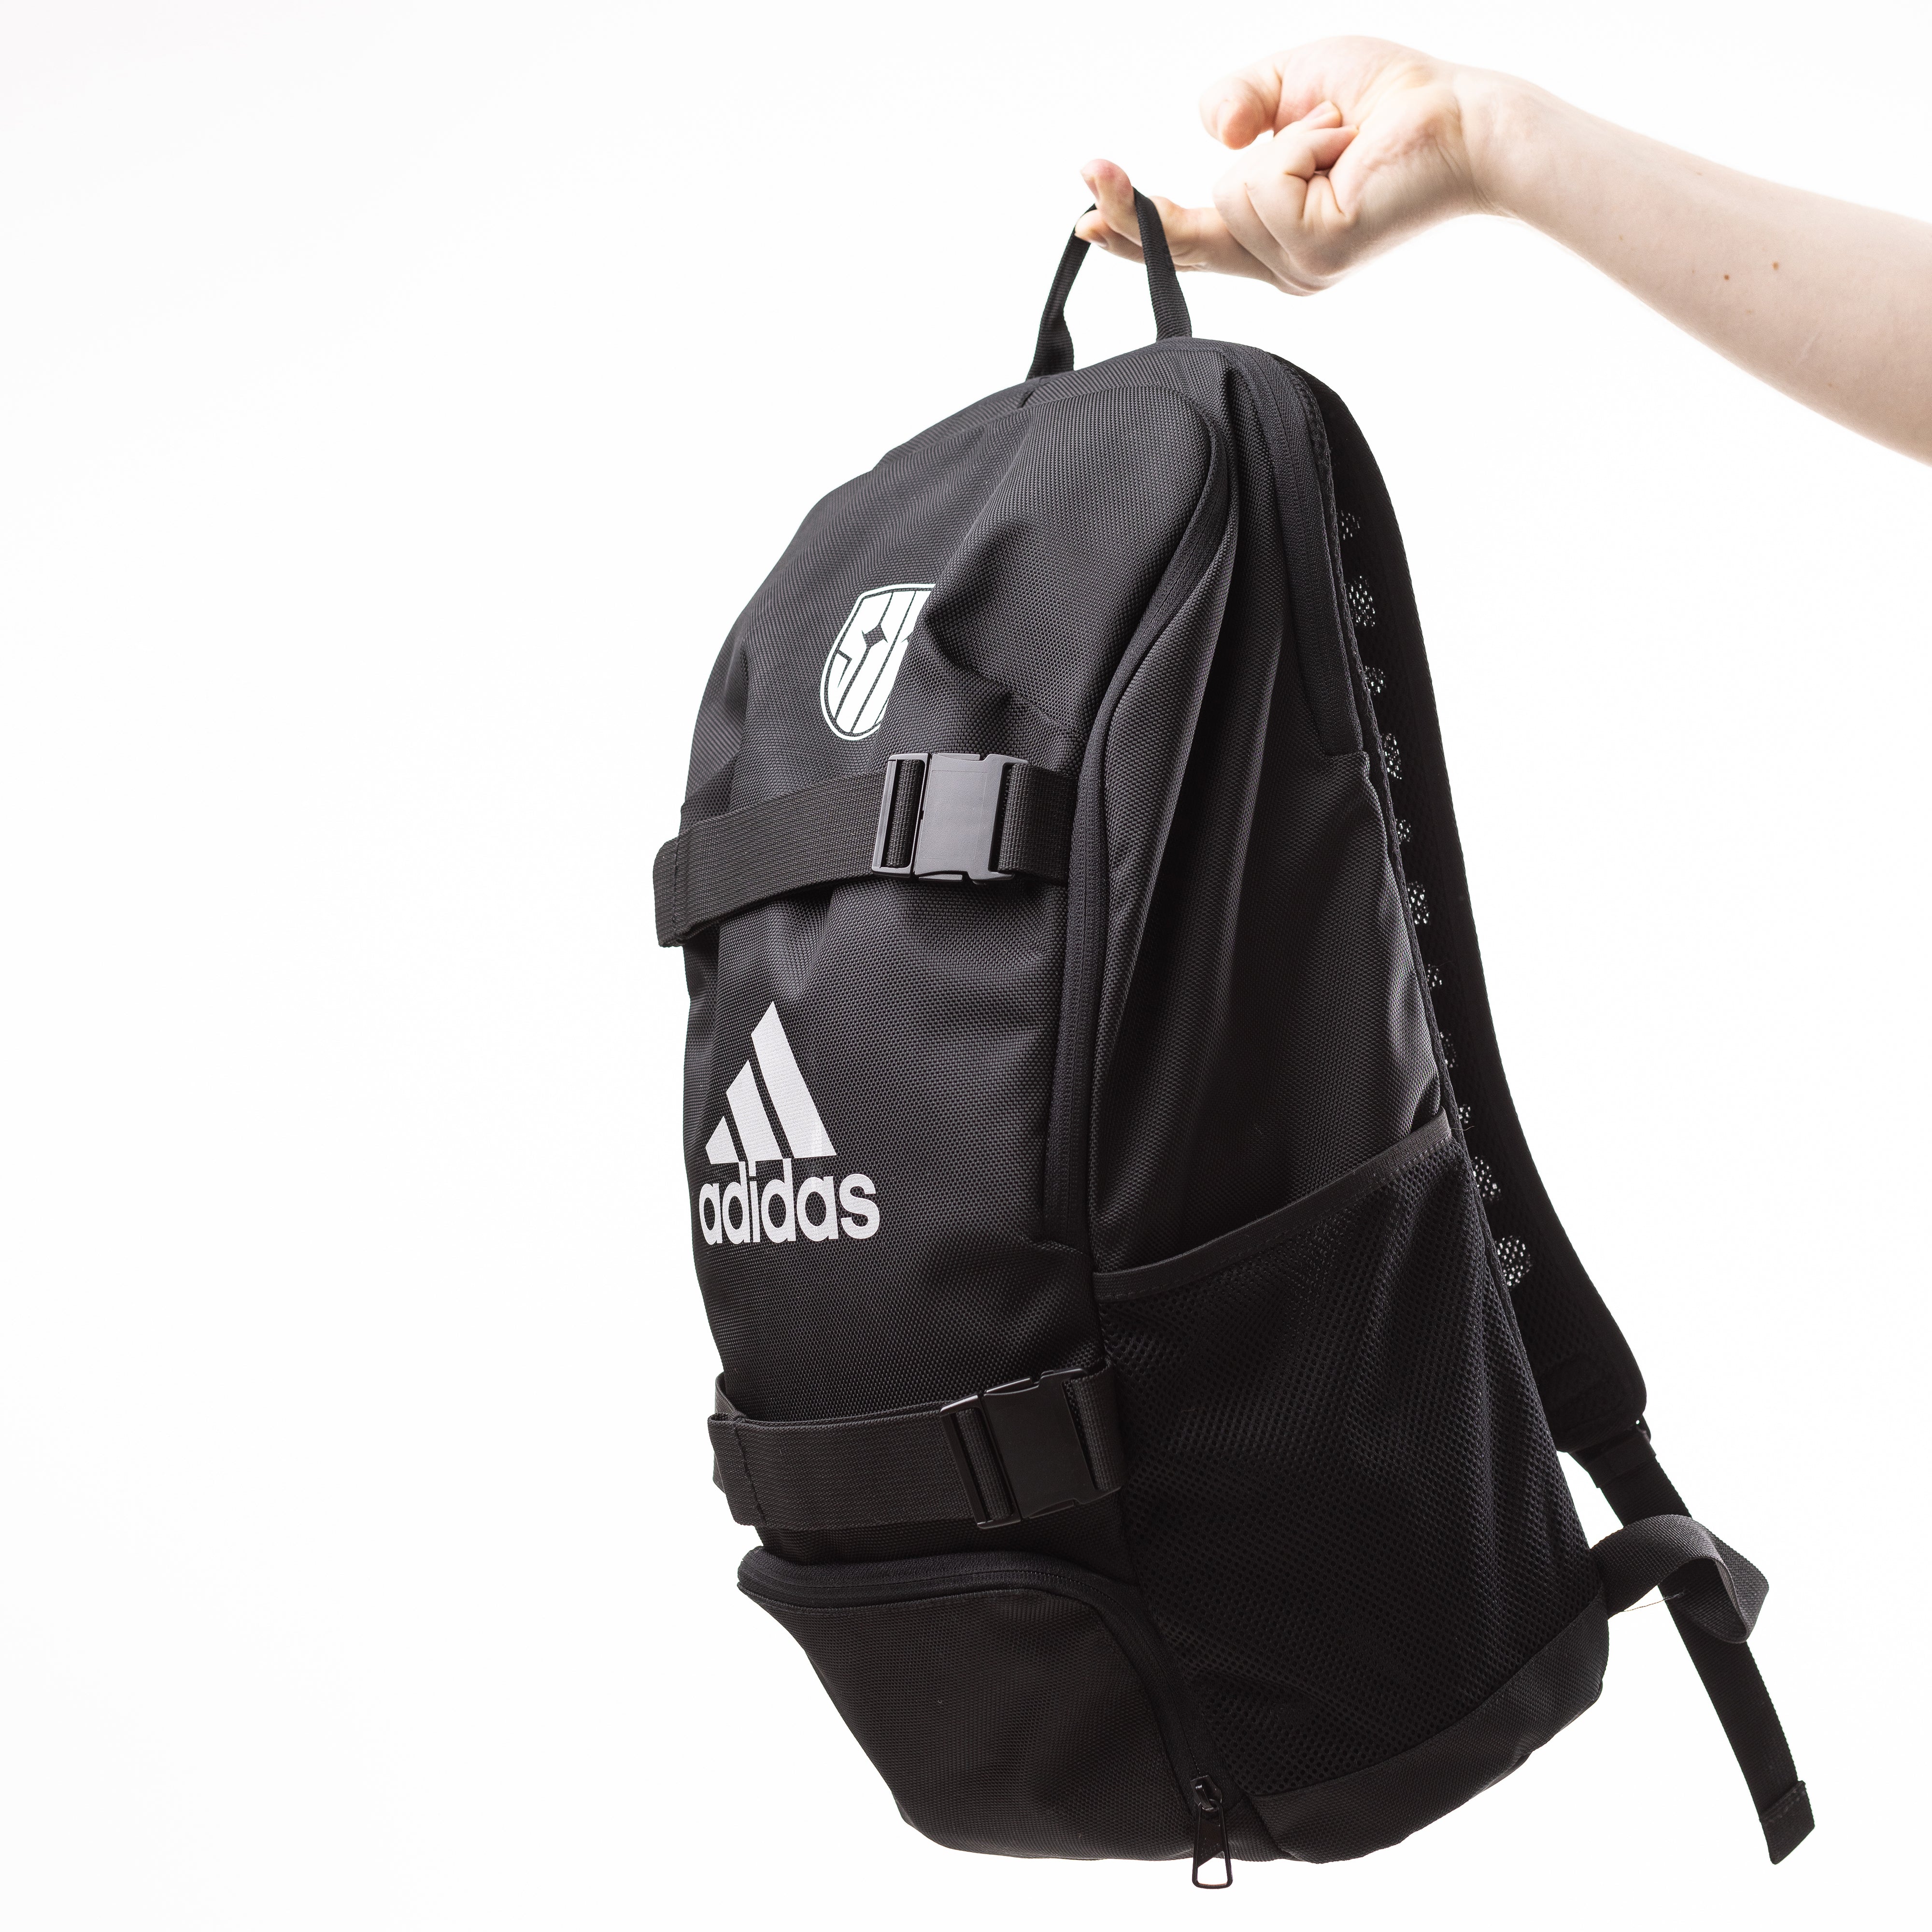 Adidas Backpack SINNERS Edition